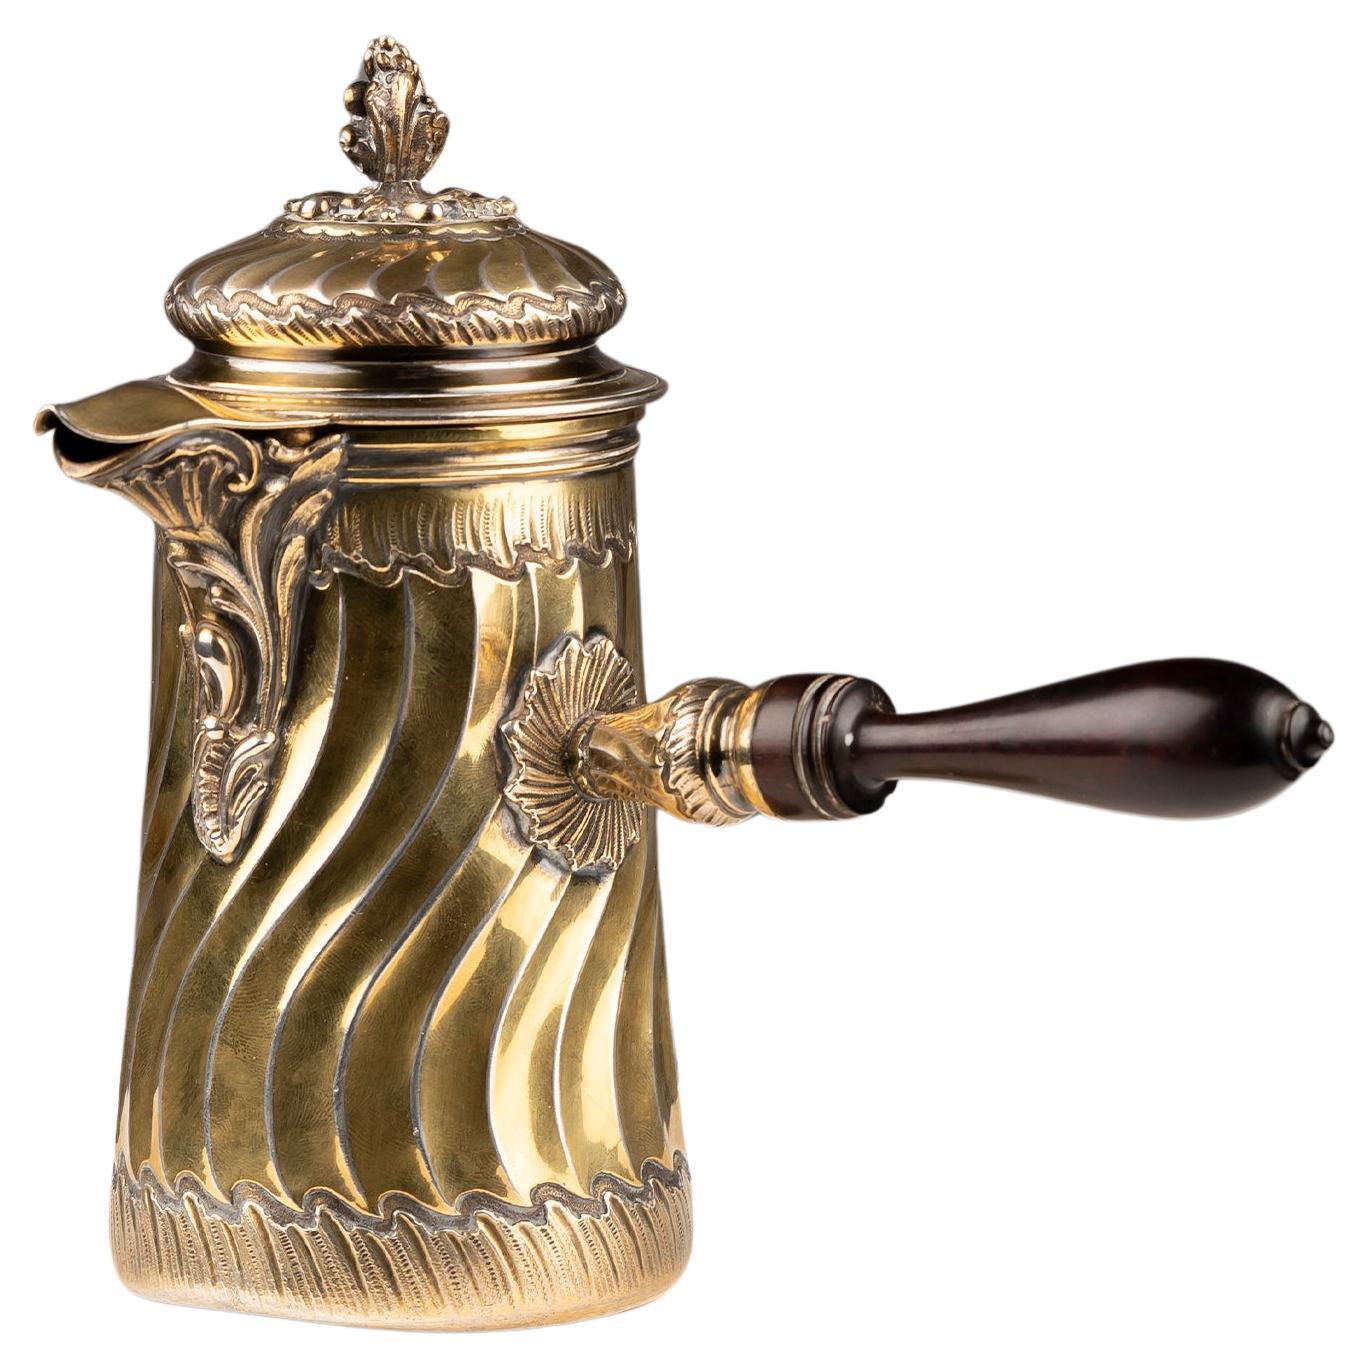 Small French Silver-Gilt Chocolate Pot by Boin-Taburet, 1880s